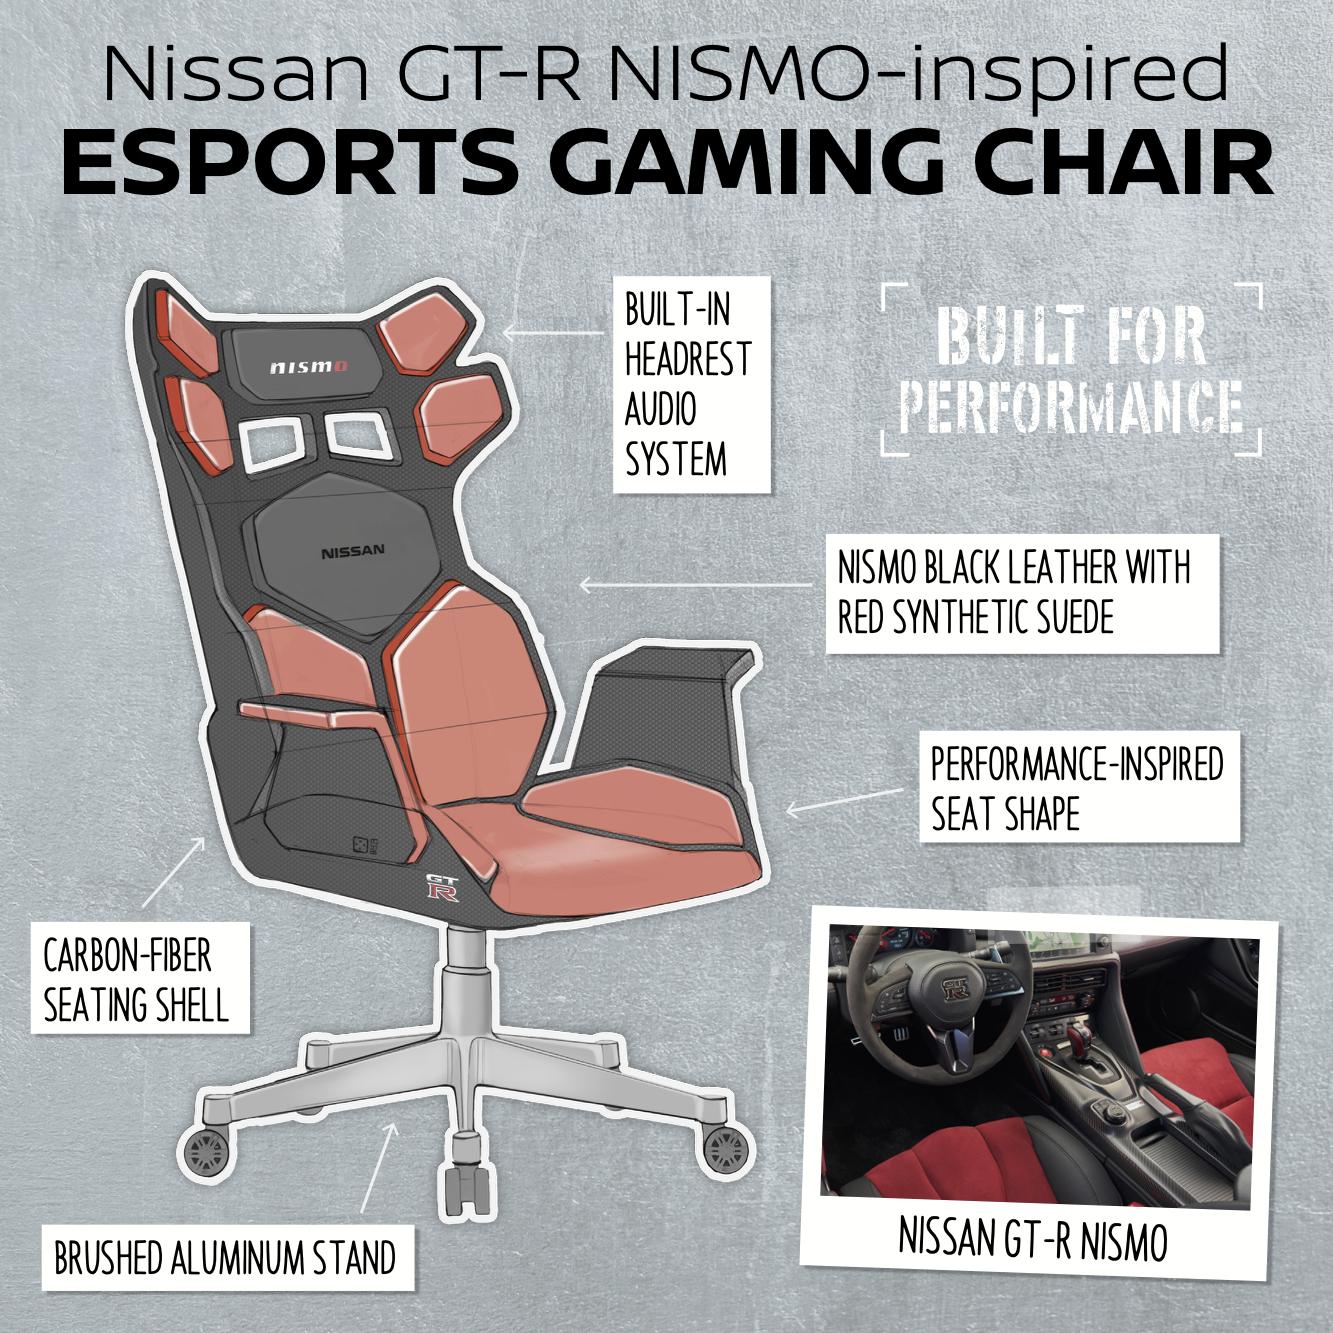 Nissan Design Dabbles In Esports With Gaming Chair Concepts